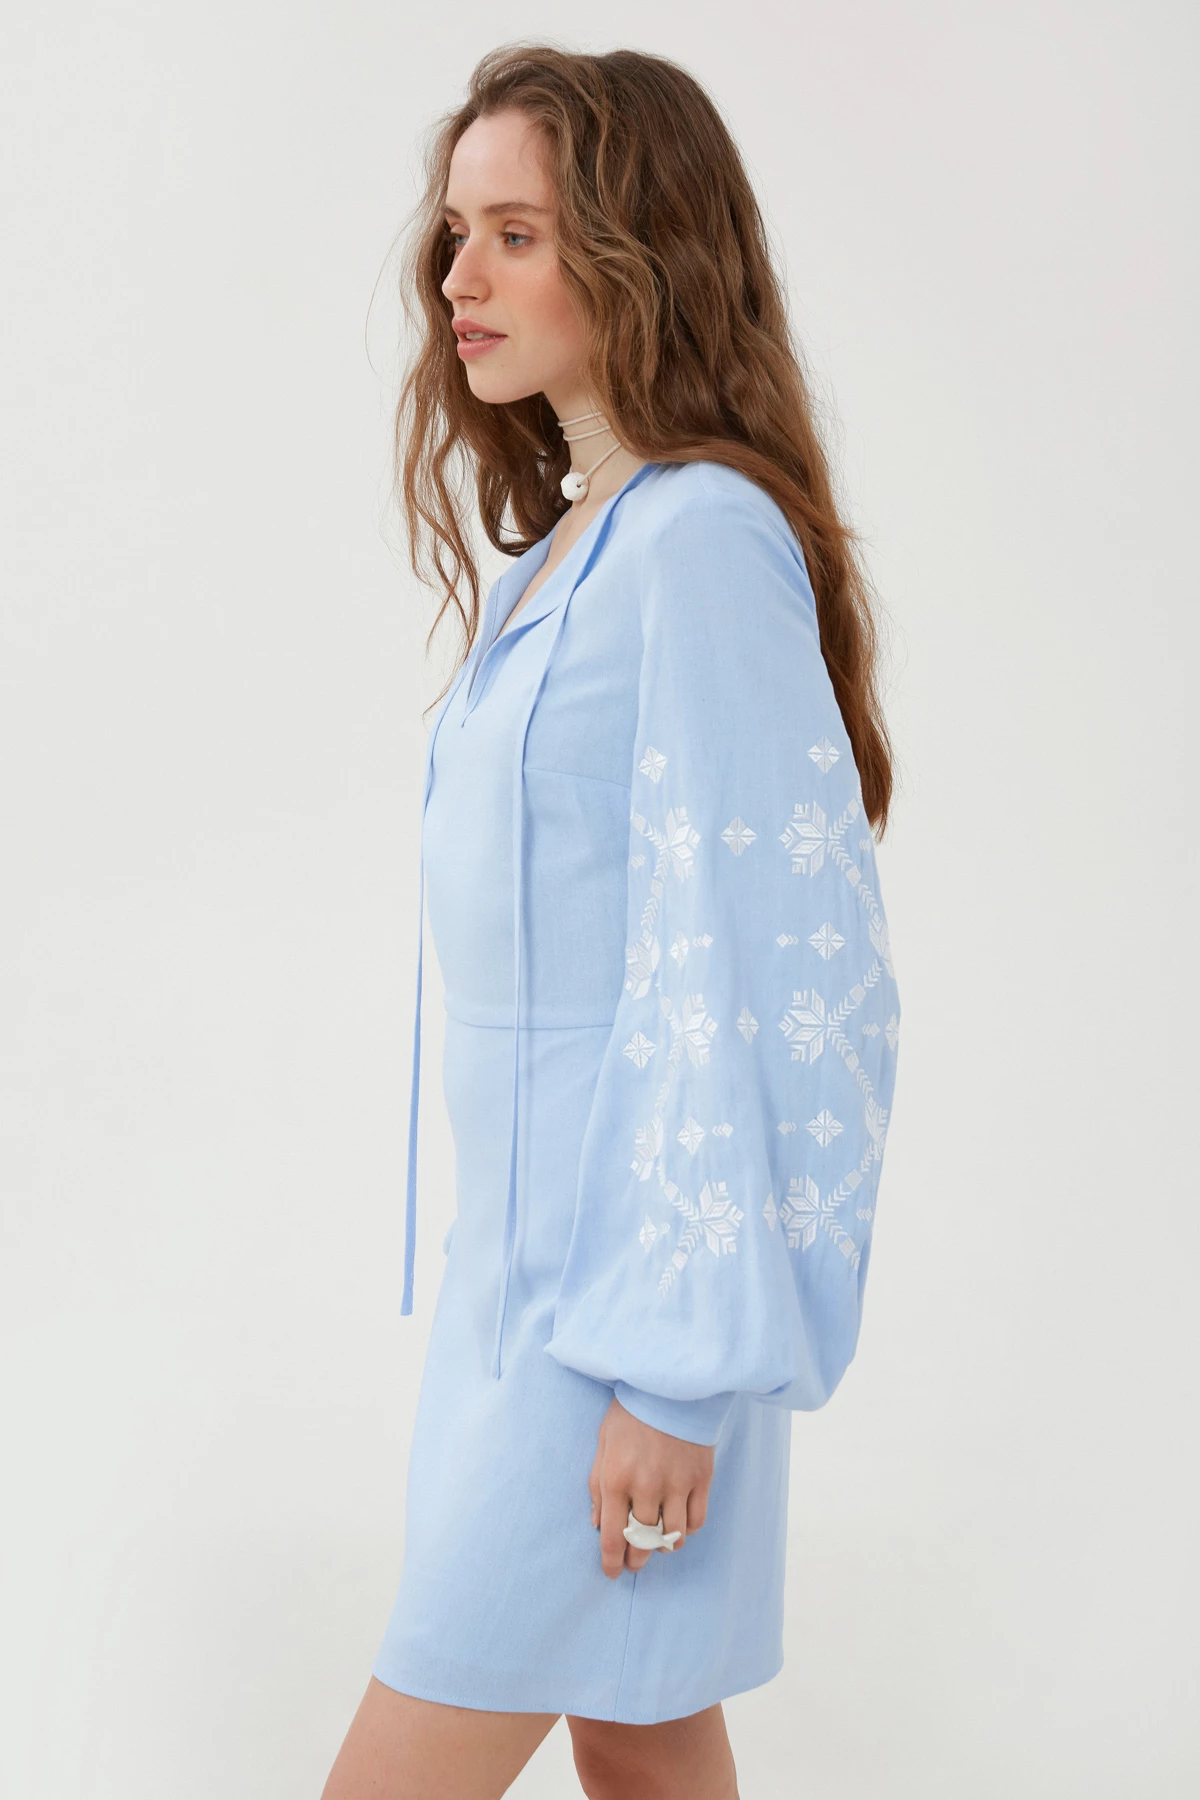 Embroidered short dress "Barvinok" with blue linen, photo 4